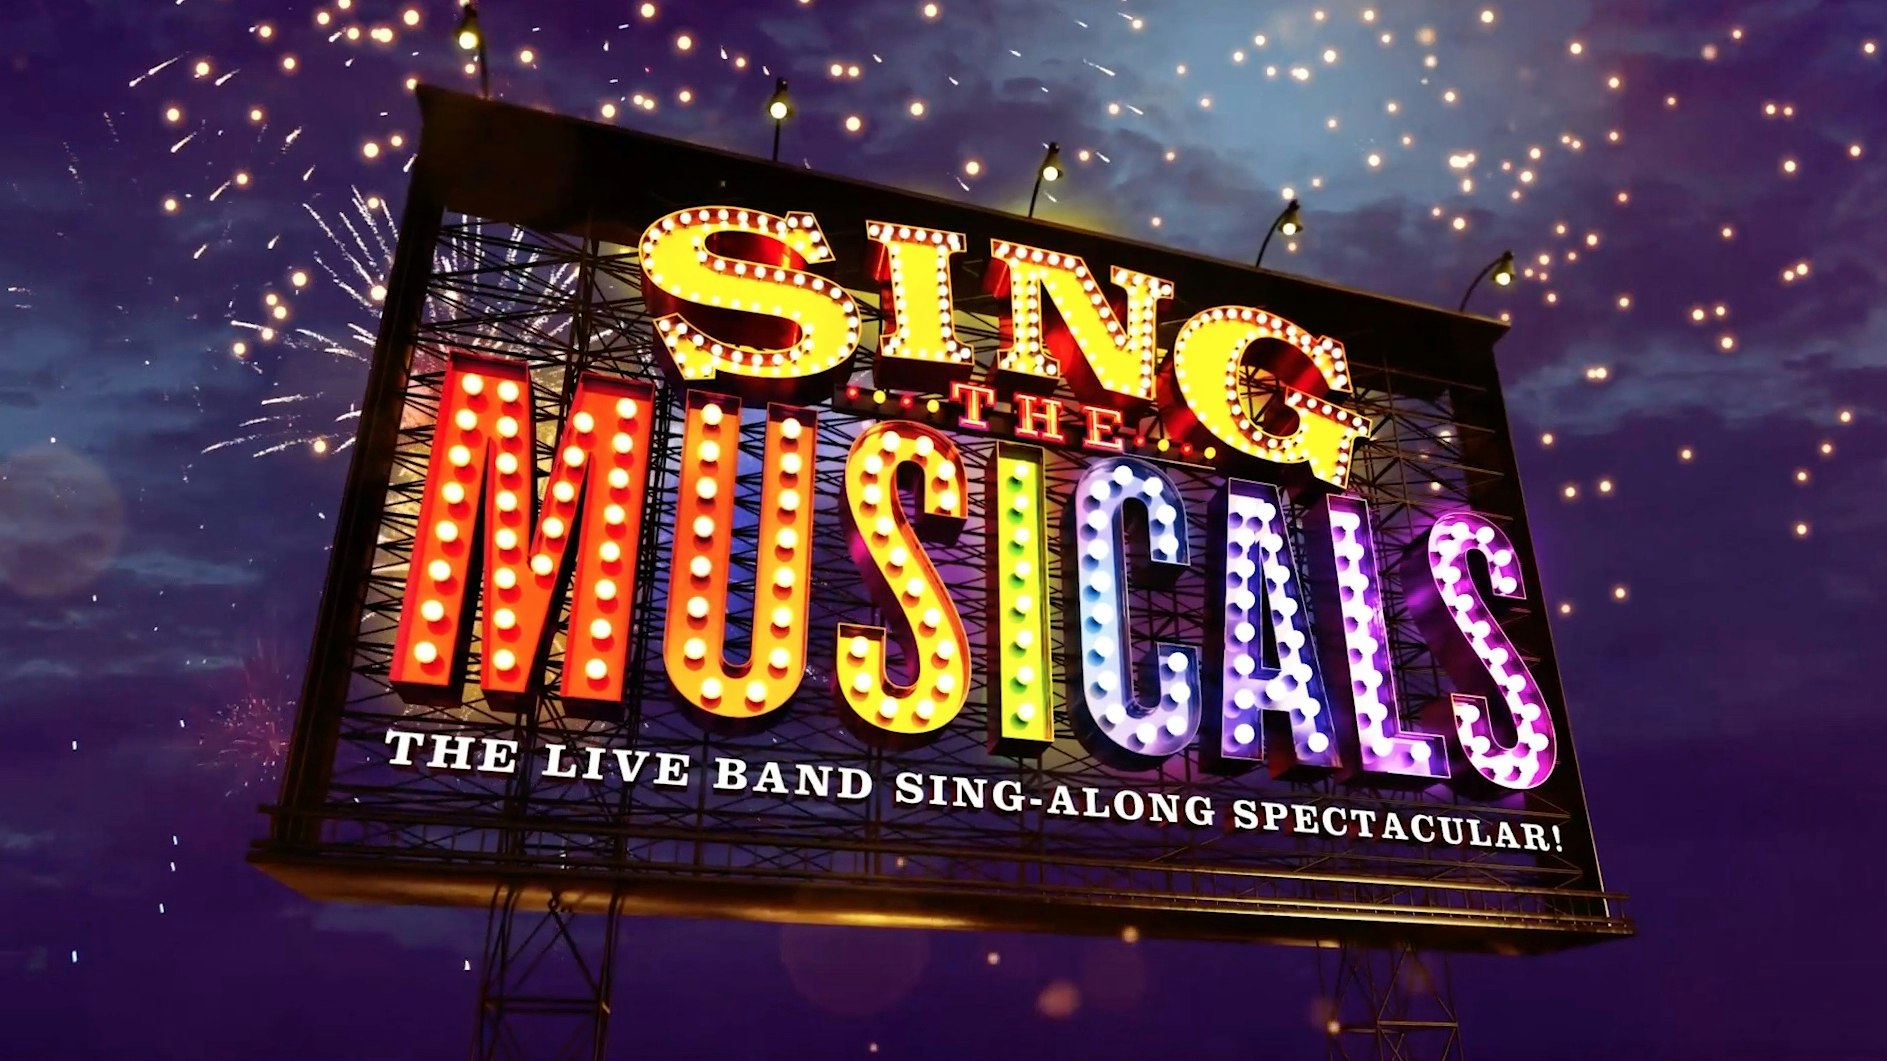 MASSAOKE Sing The Musicals – BACK BY DEMAND! – IT’S THE ULTIMATE LIVE SING-A-LONG